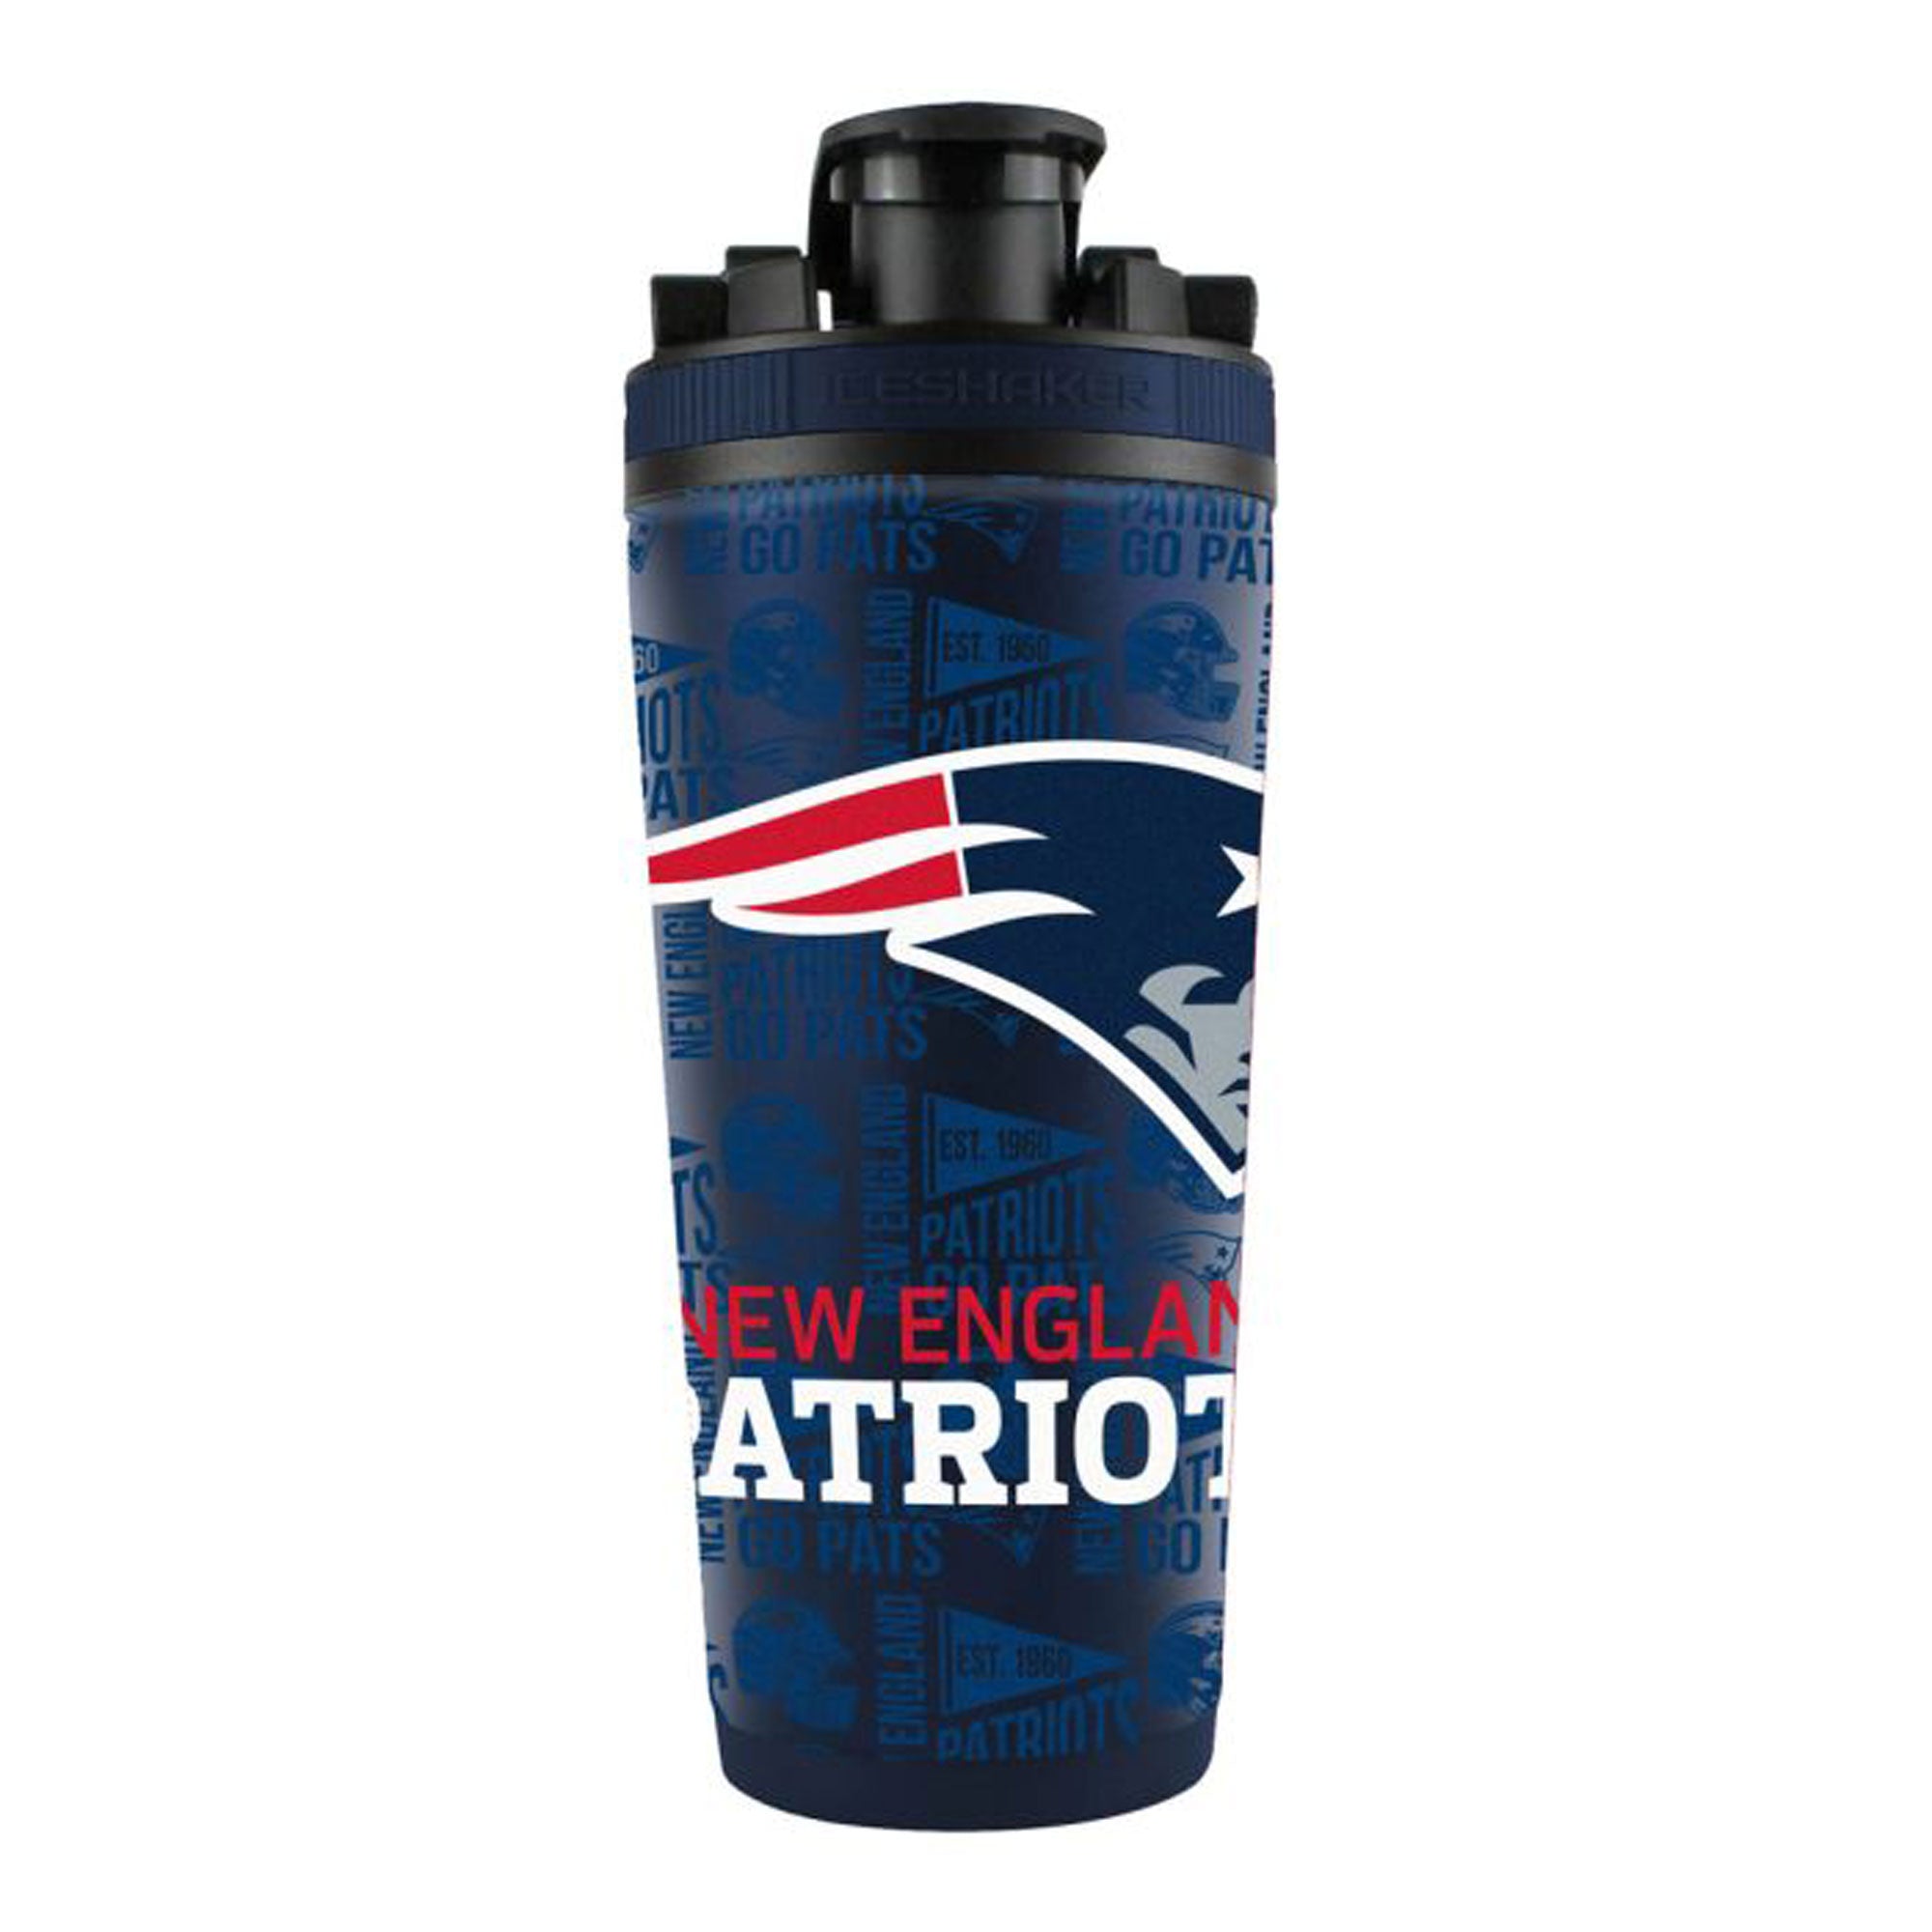 Officially Licensed New England Patriots 4D Ice Shaker